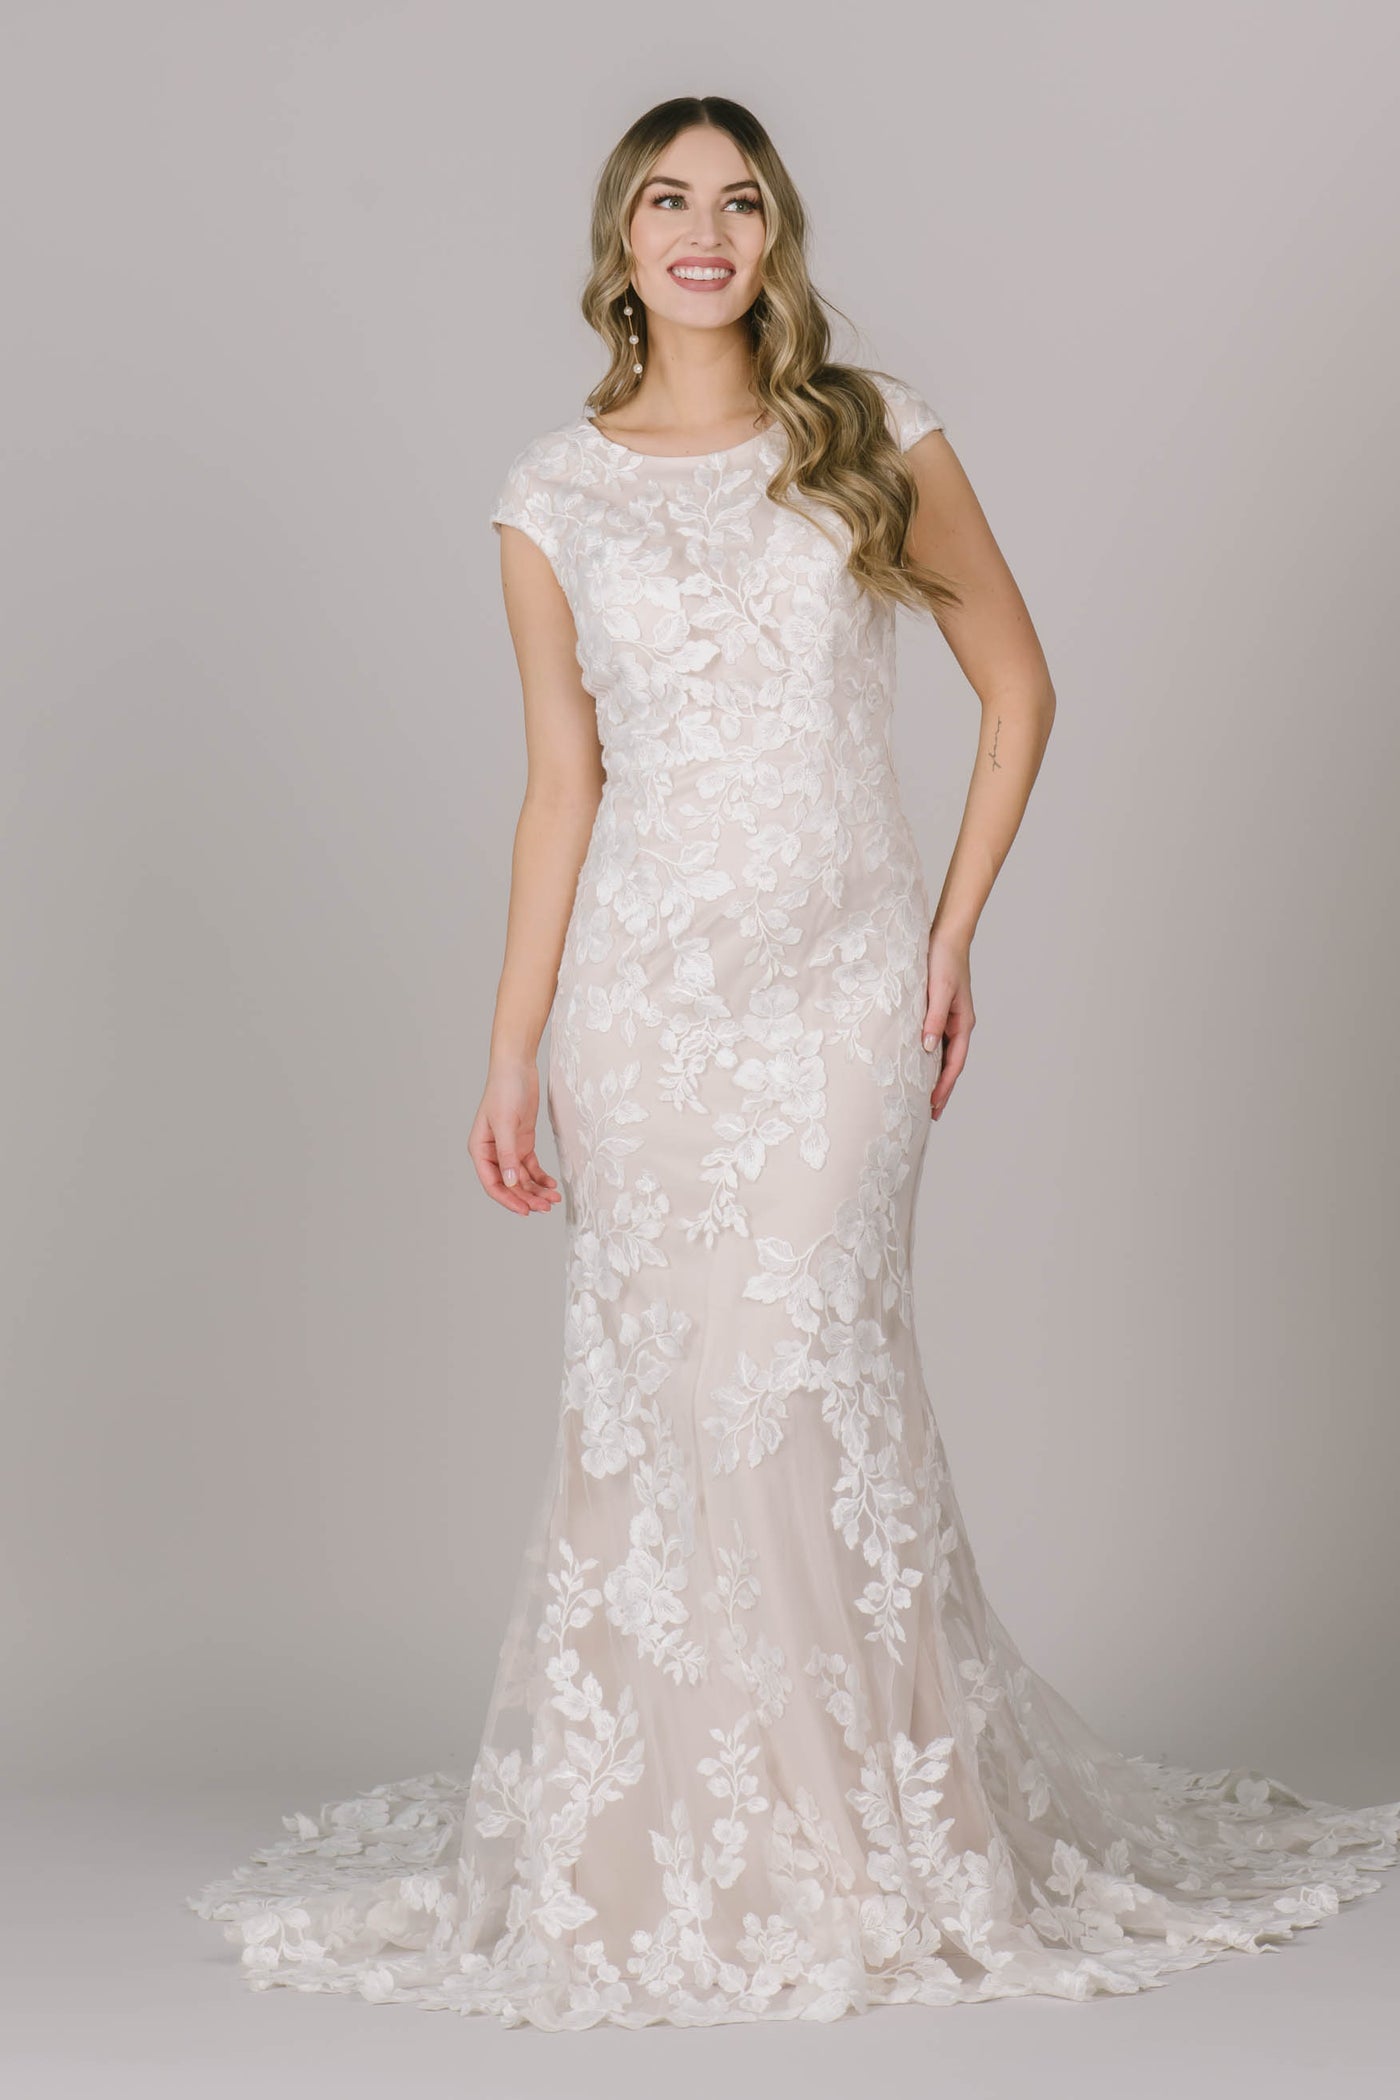 This fitted lace modest wedding dress features beautiful floral appliques, cap sleeves, and a higher scoop neckline.